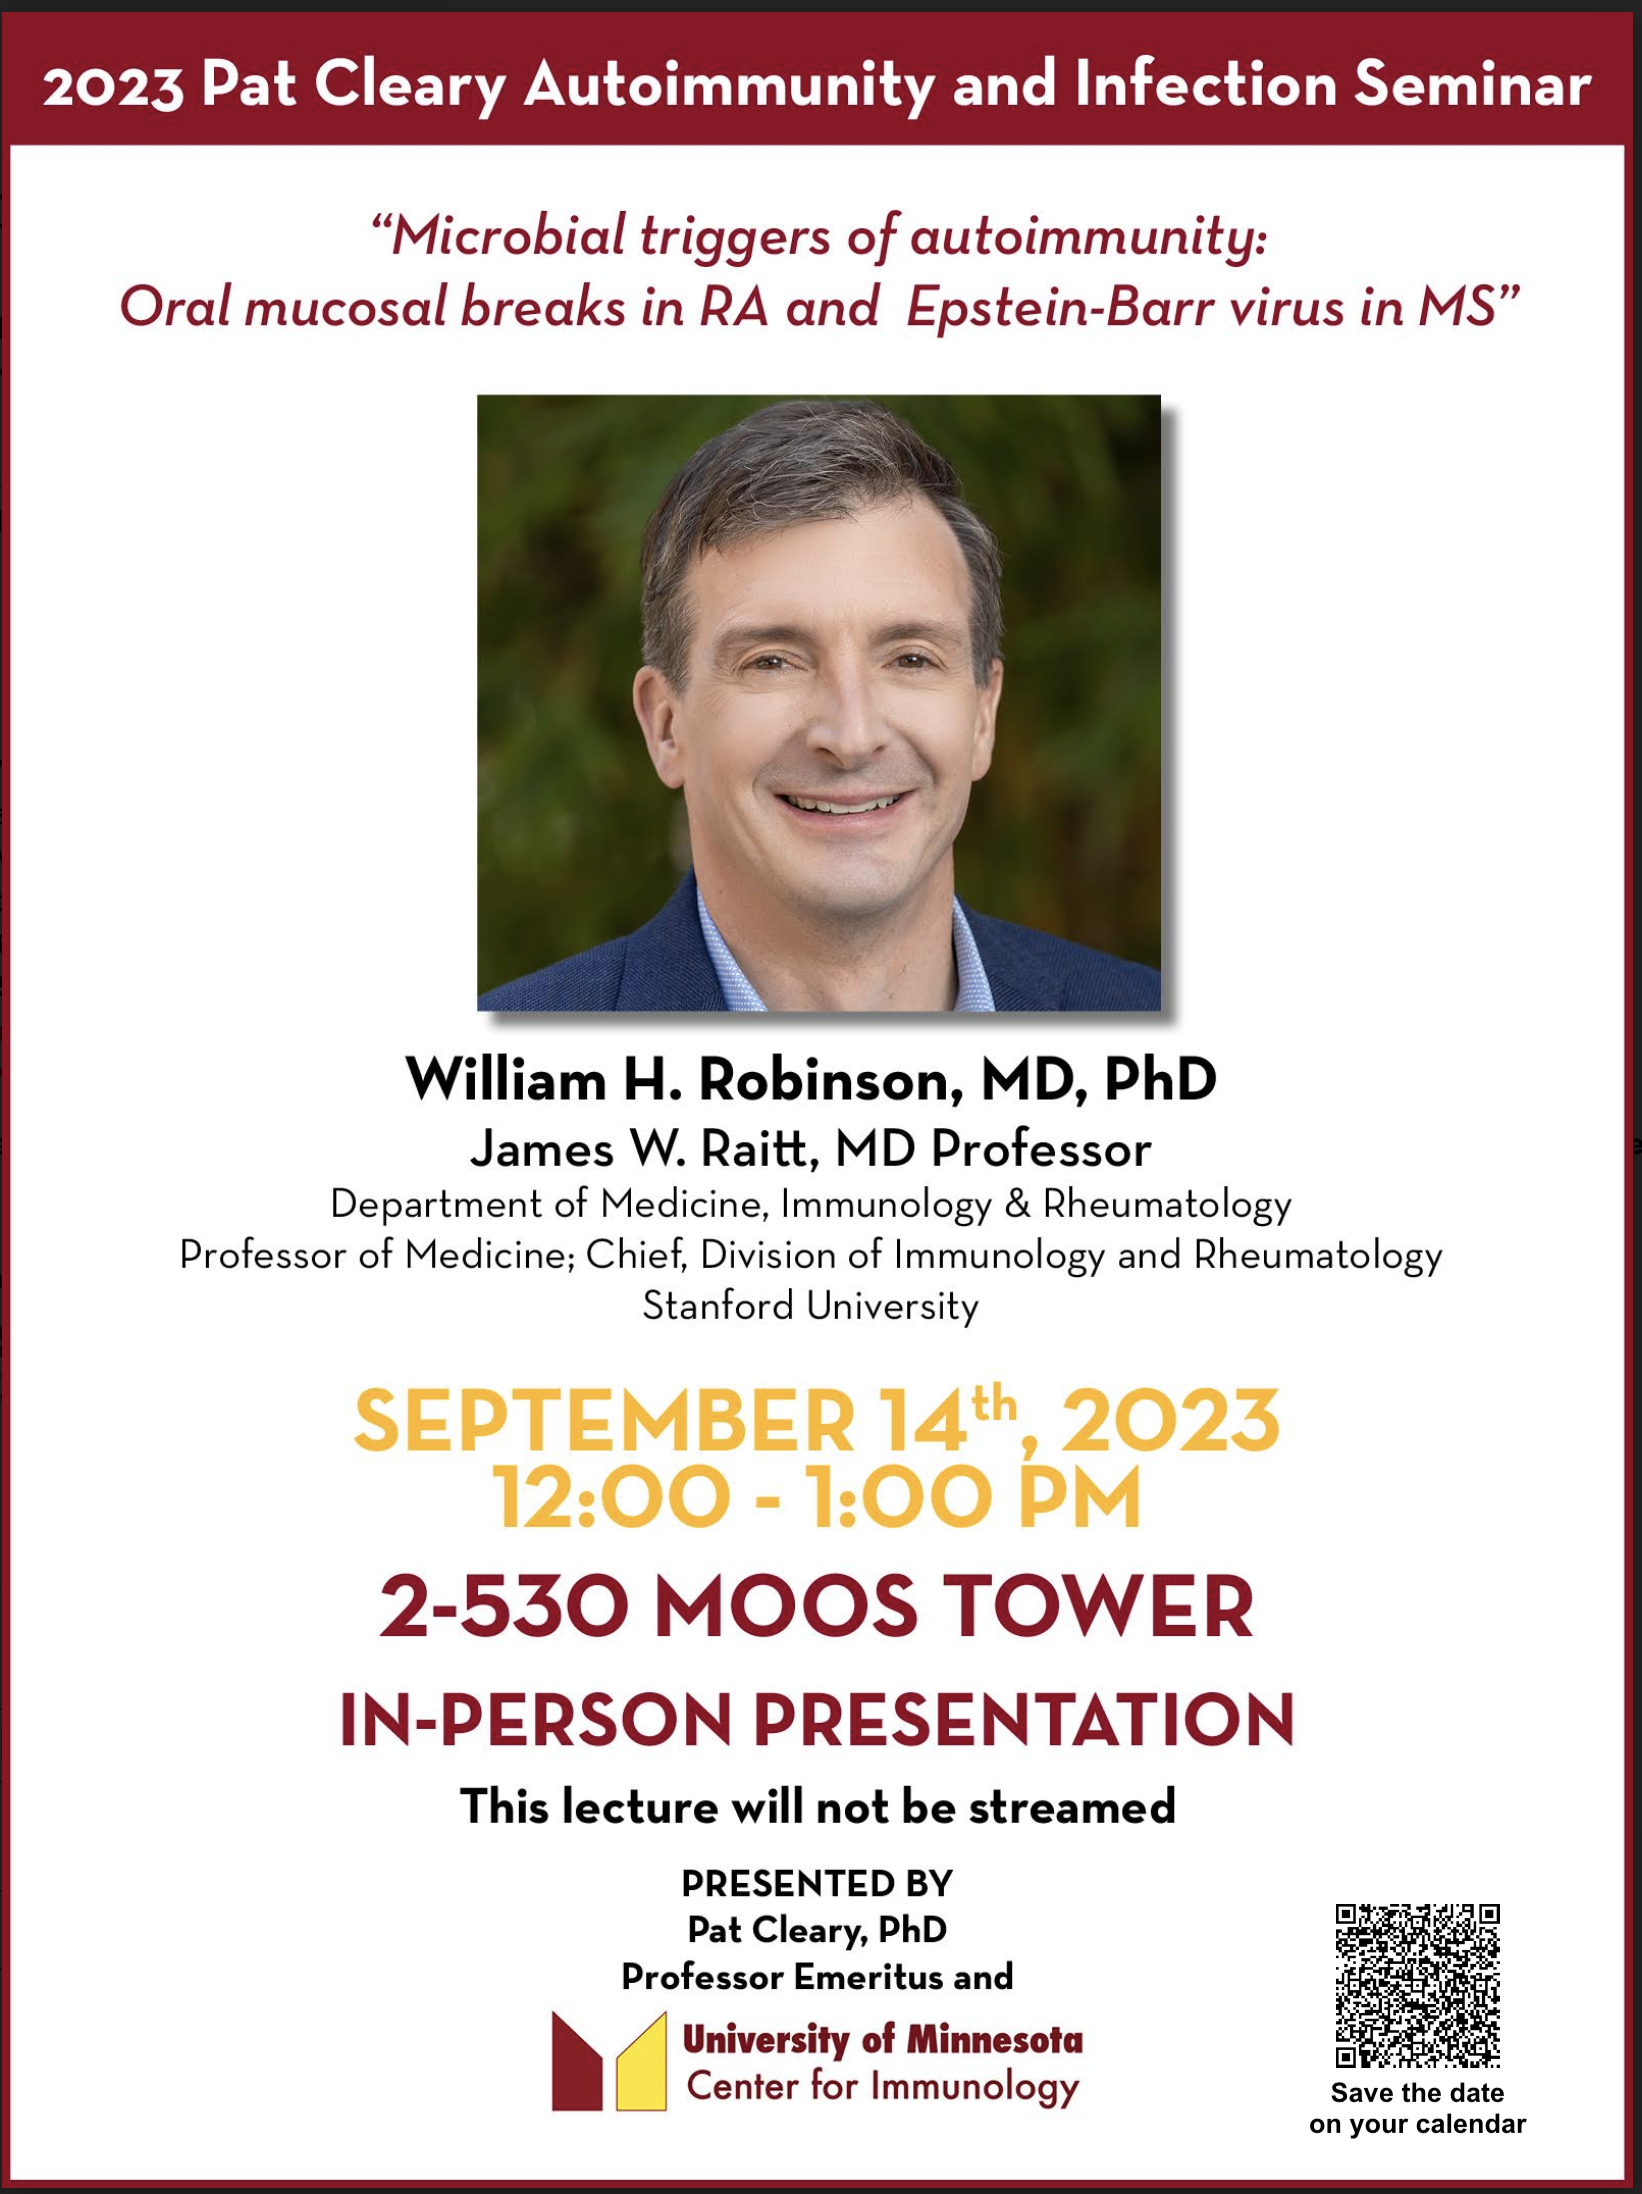 Immunology- 2023 Pat Cleary Autoimmunity and Infection Seminar